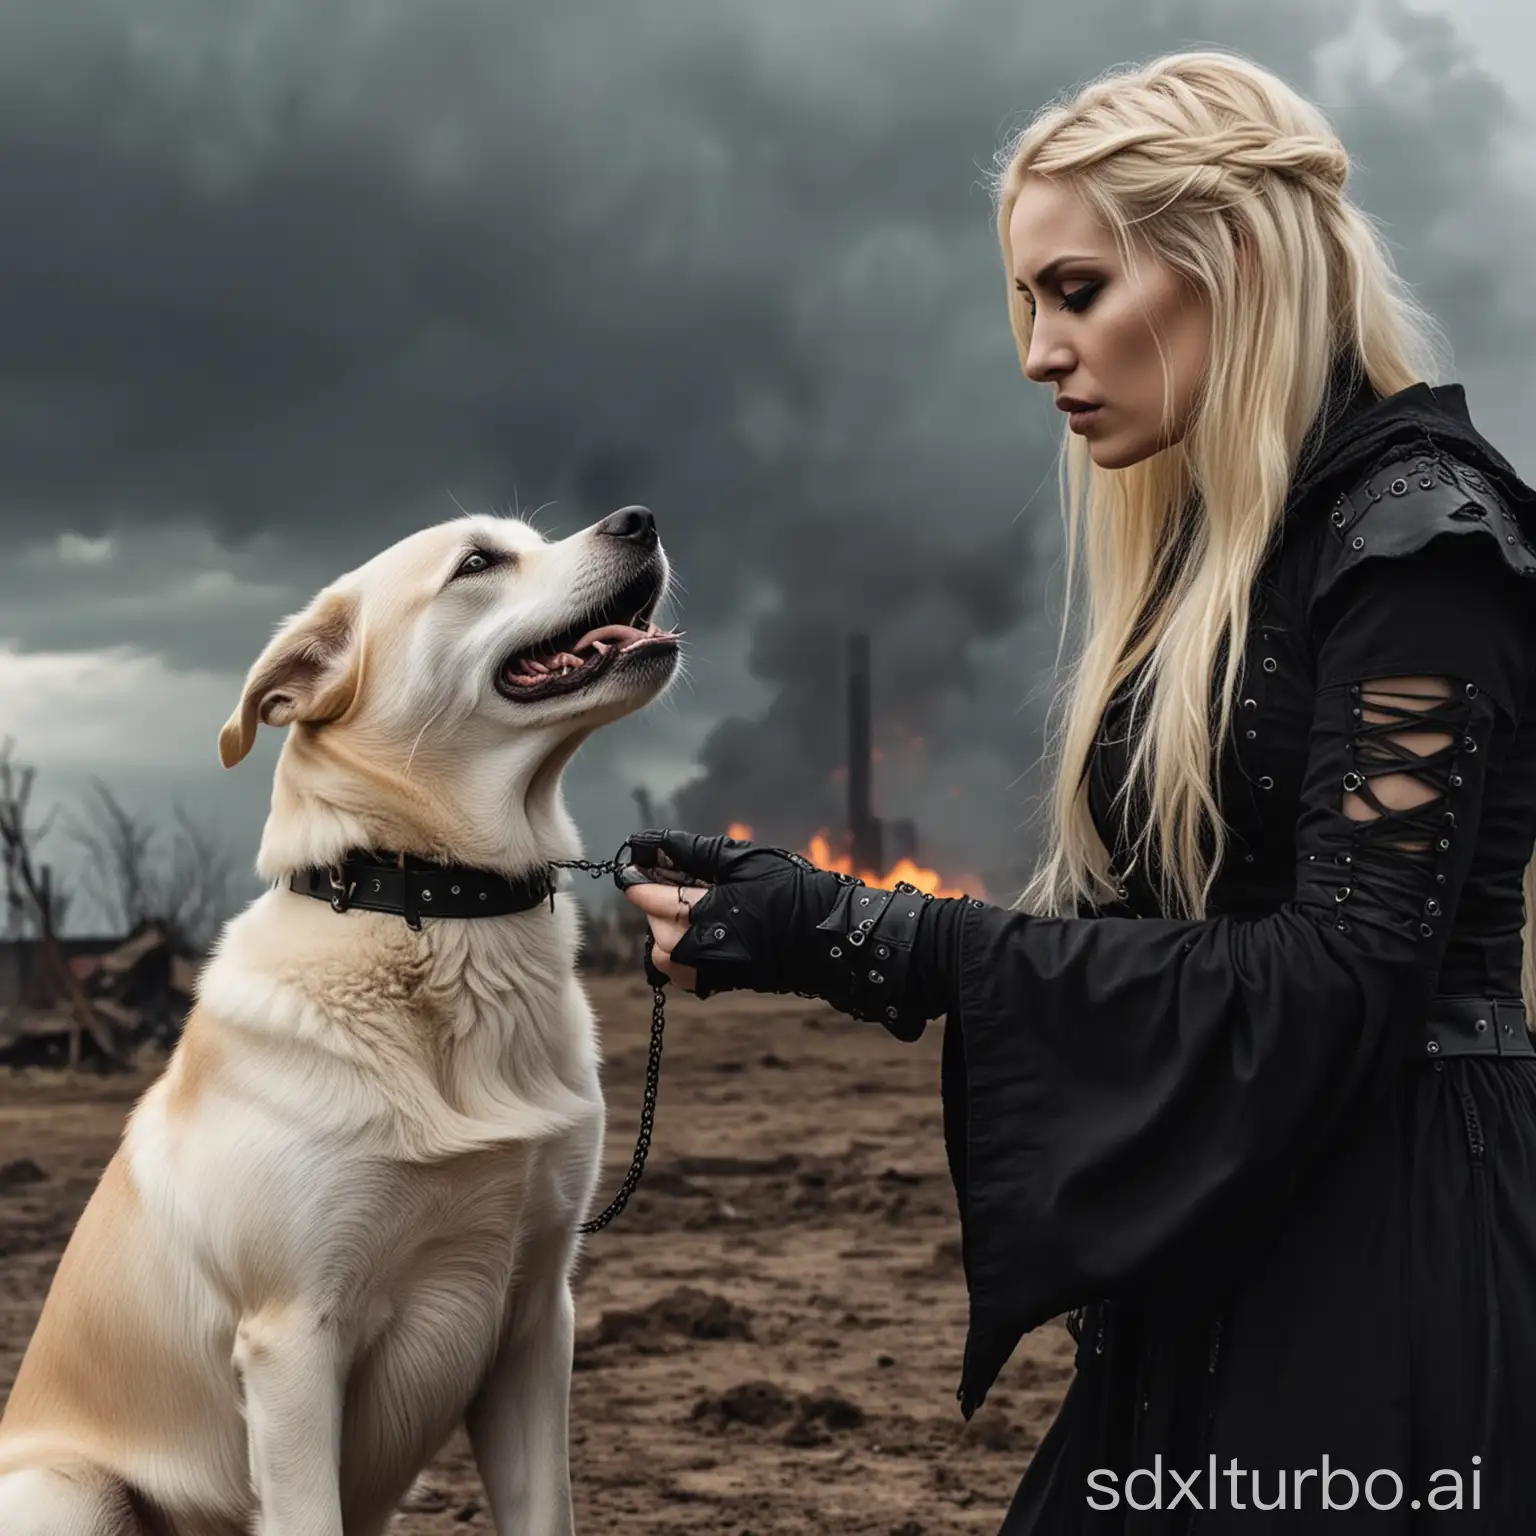 blonde gothic woman looks at the apocalypse and strokes her dog.